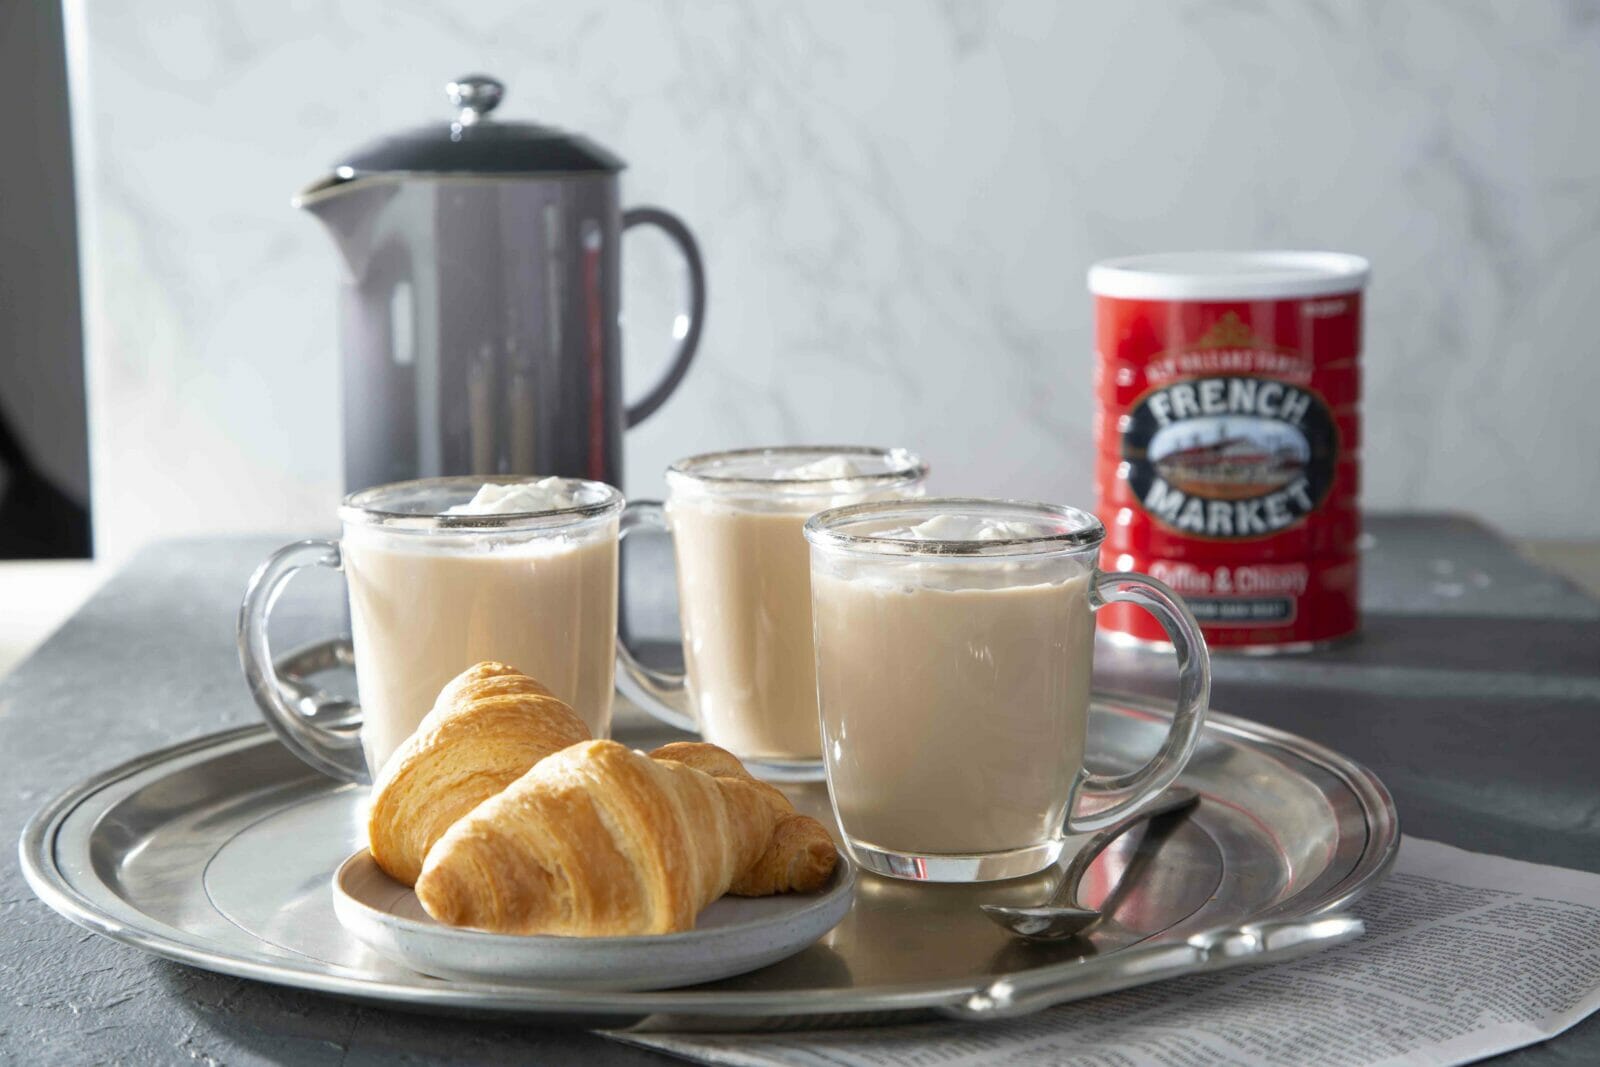 three clear mugs of cafe au lait, or coffee with hot milk, with can of French Market Coffee & Chicory and a metal pitcher of hot milk in the background